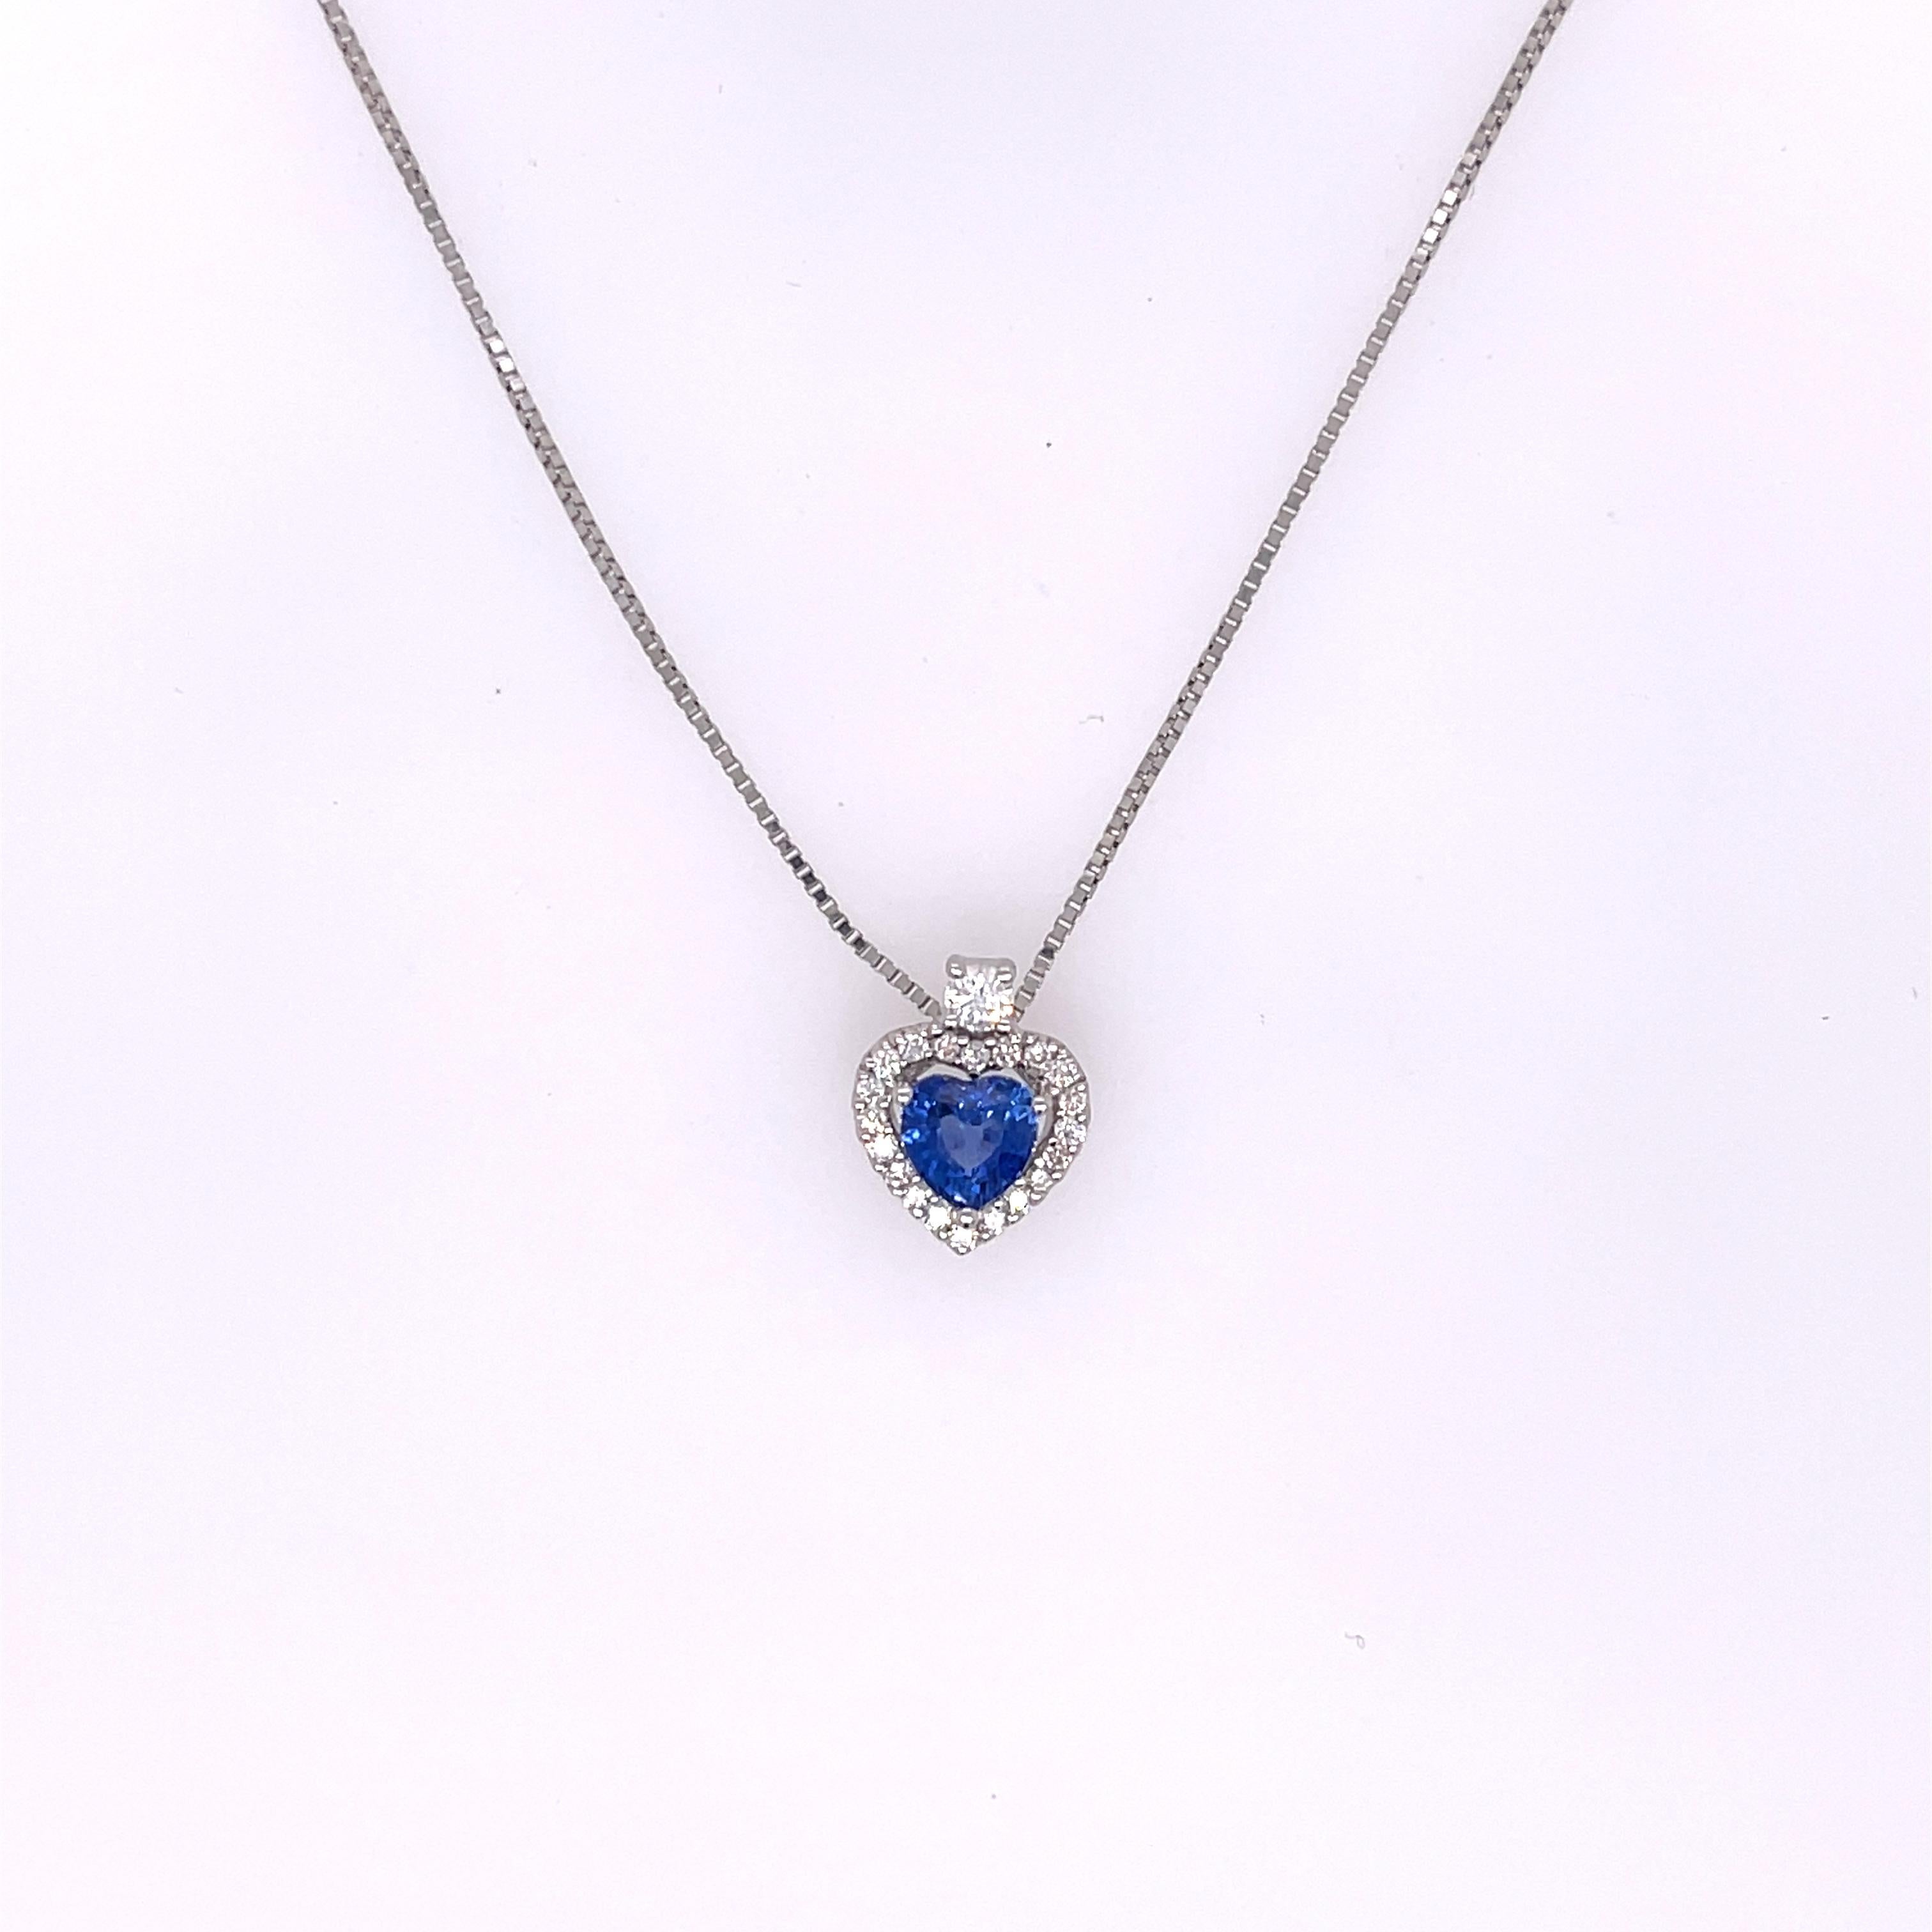 Pendant necklace featuring a 0.46ct heart shaped sapphire and a halo of 0.15ctw of brilliant cut round diamond in 14K white gold. The pendant is approximately 10.85mm by 8.70mm.